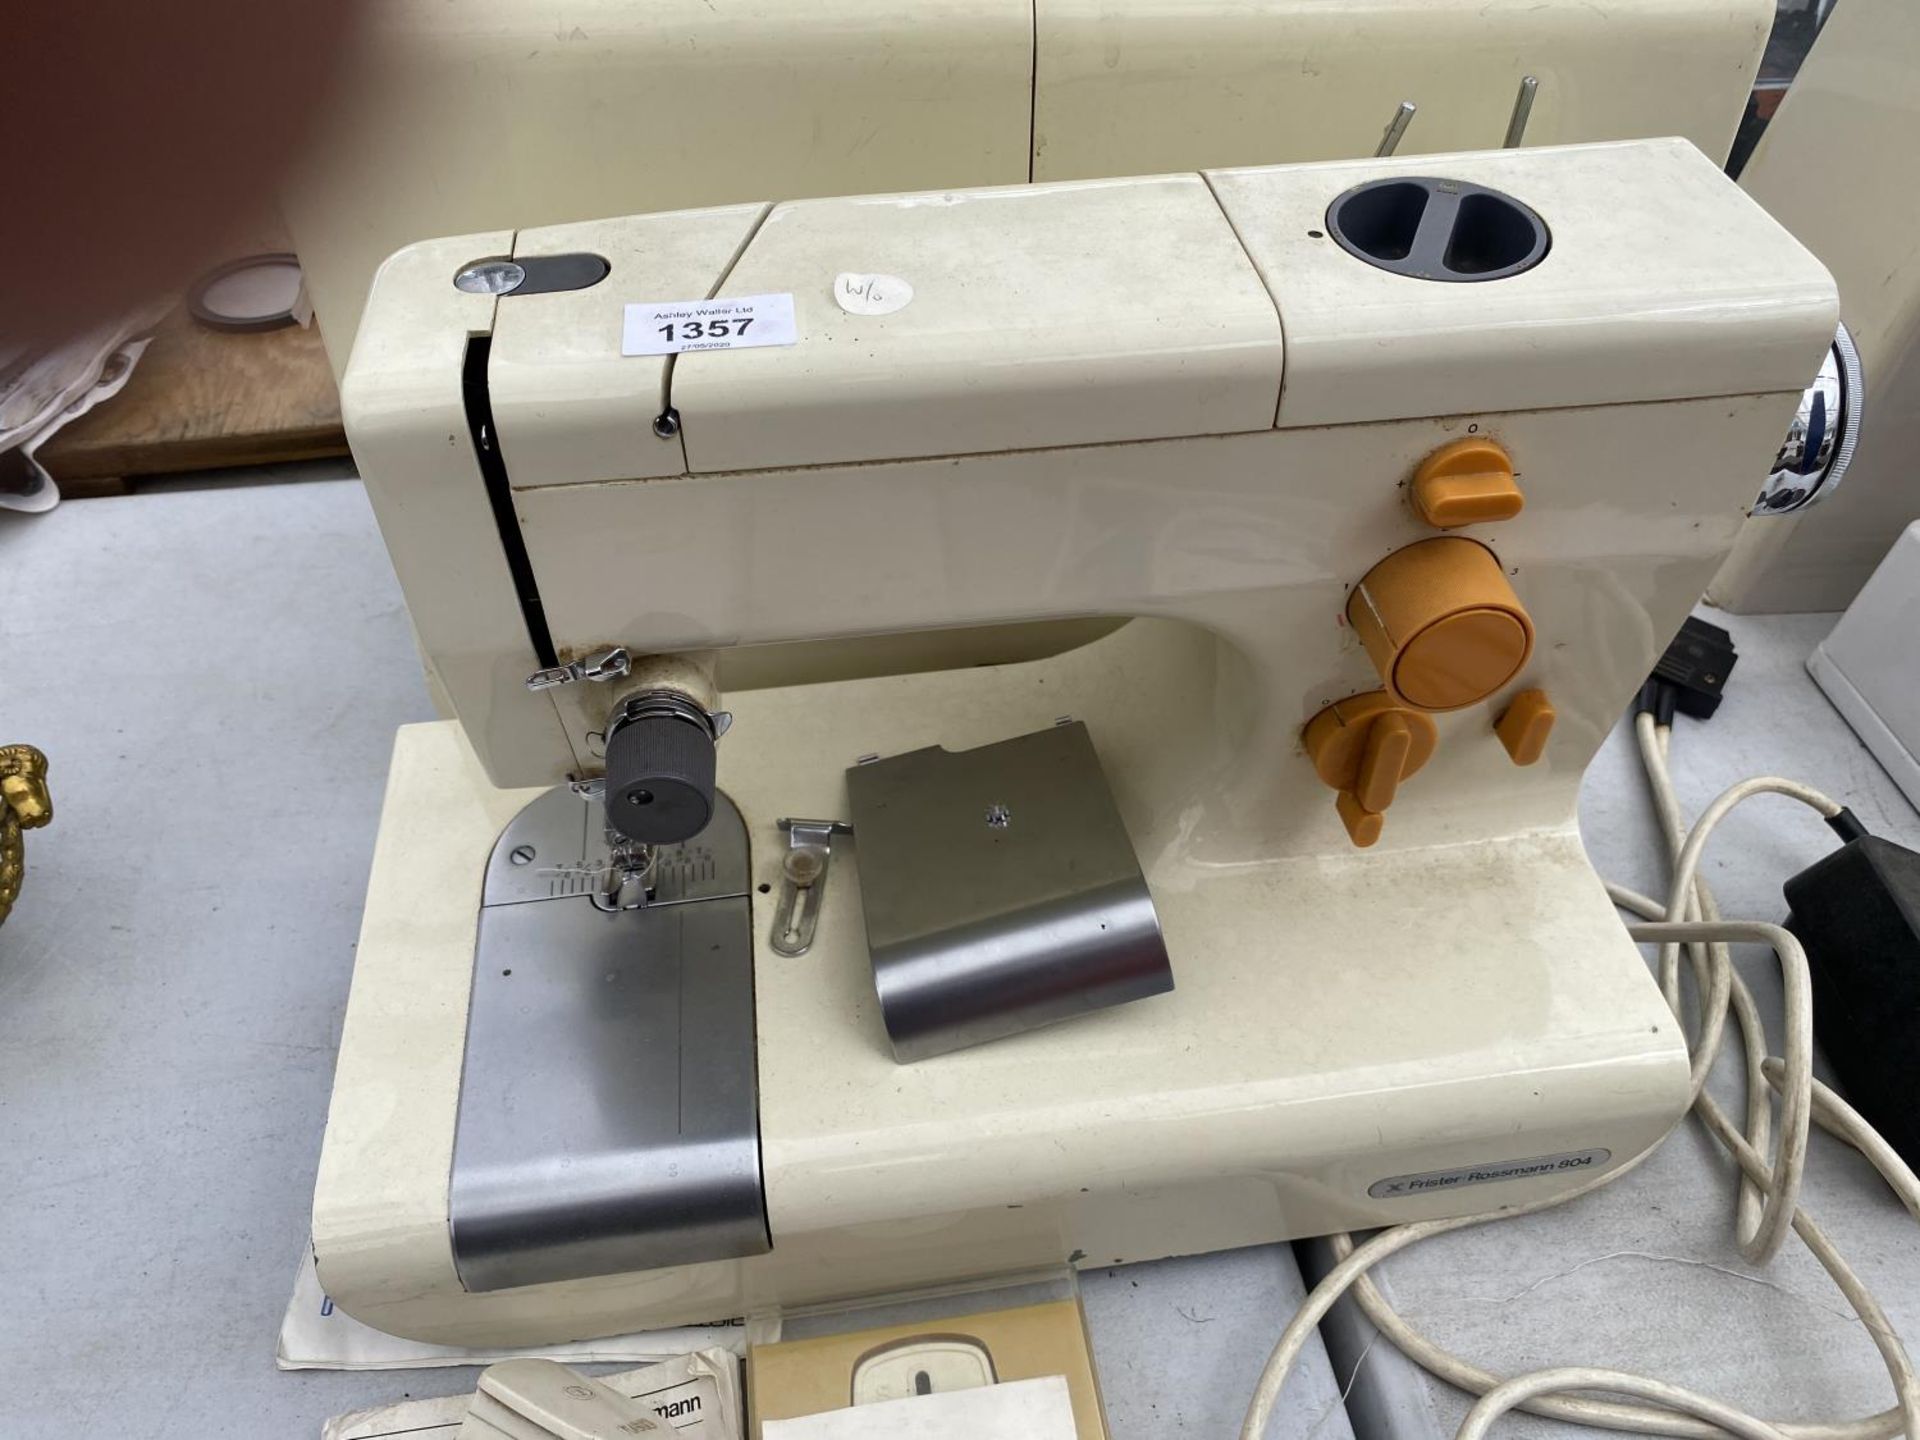 A CASED FRISTER ROSSMANN SEWING MACHINE WITH ACCESSORIES IN WORKING ORDER - Image 2 of 2